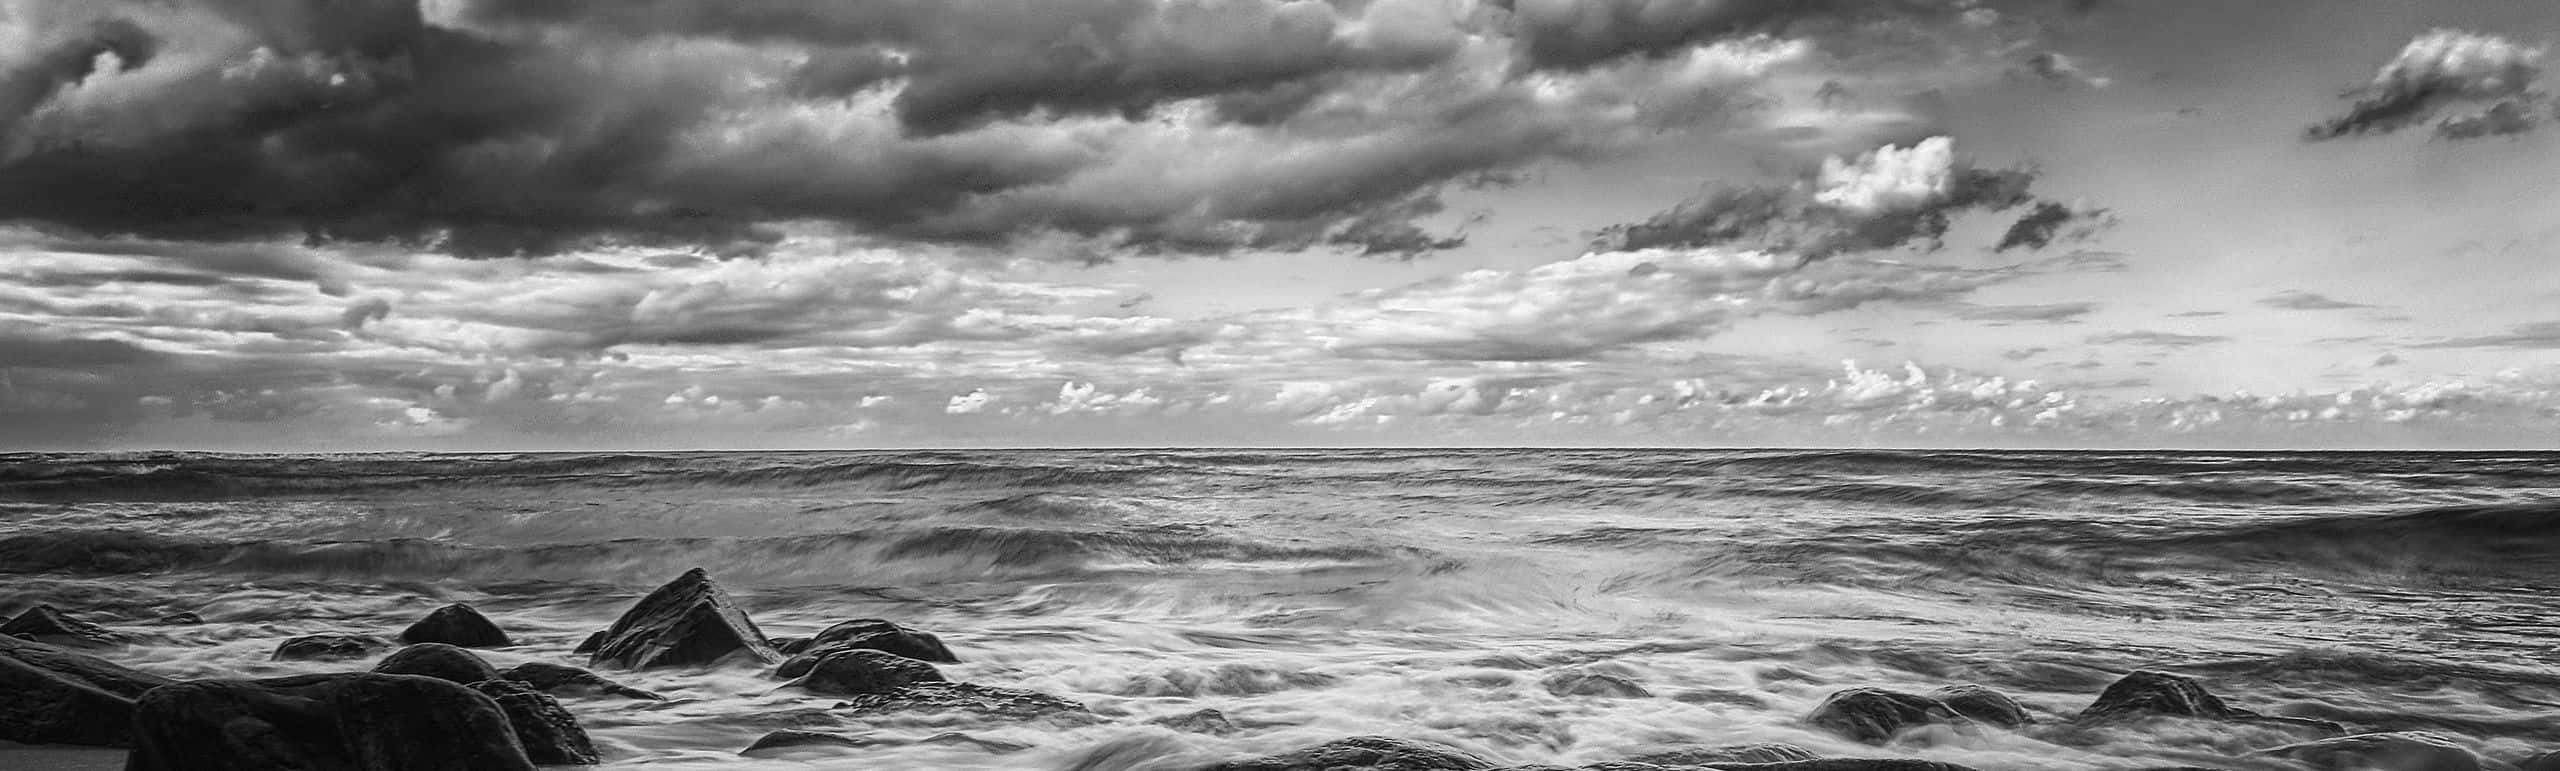 A serene black and white ocean scene featuring calm waves Wallpaper